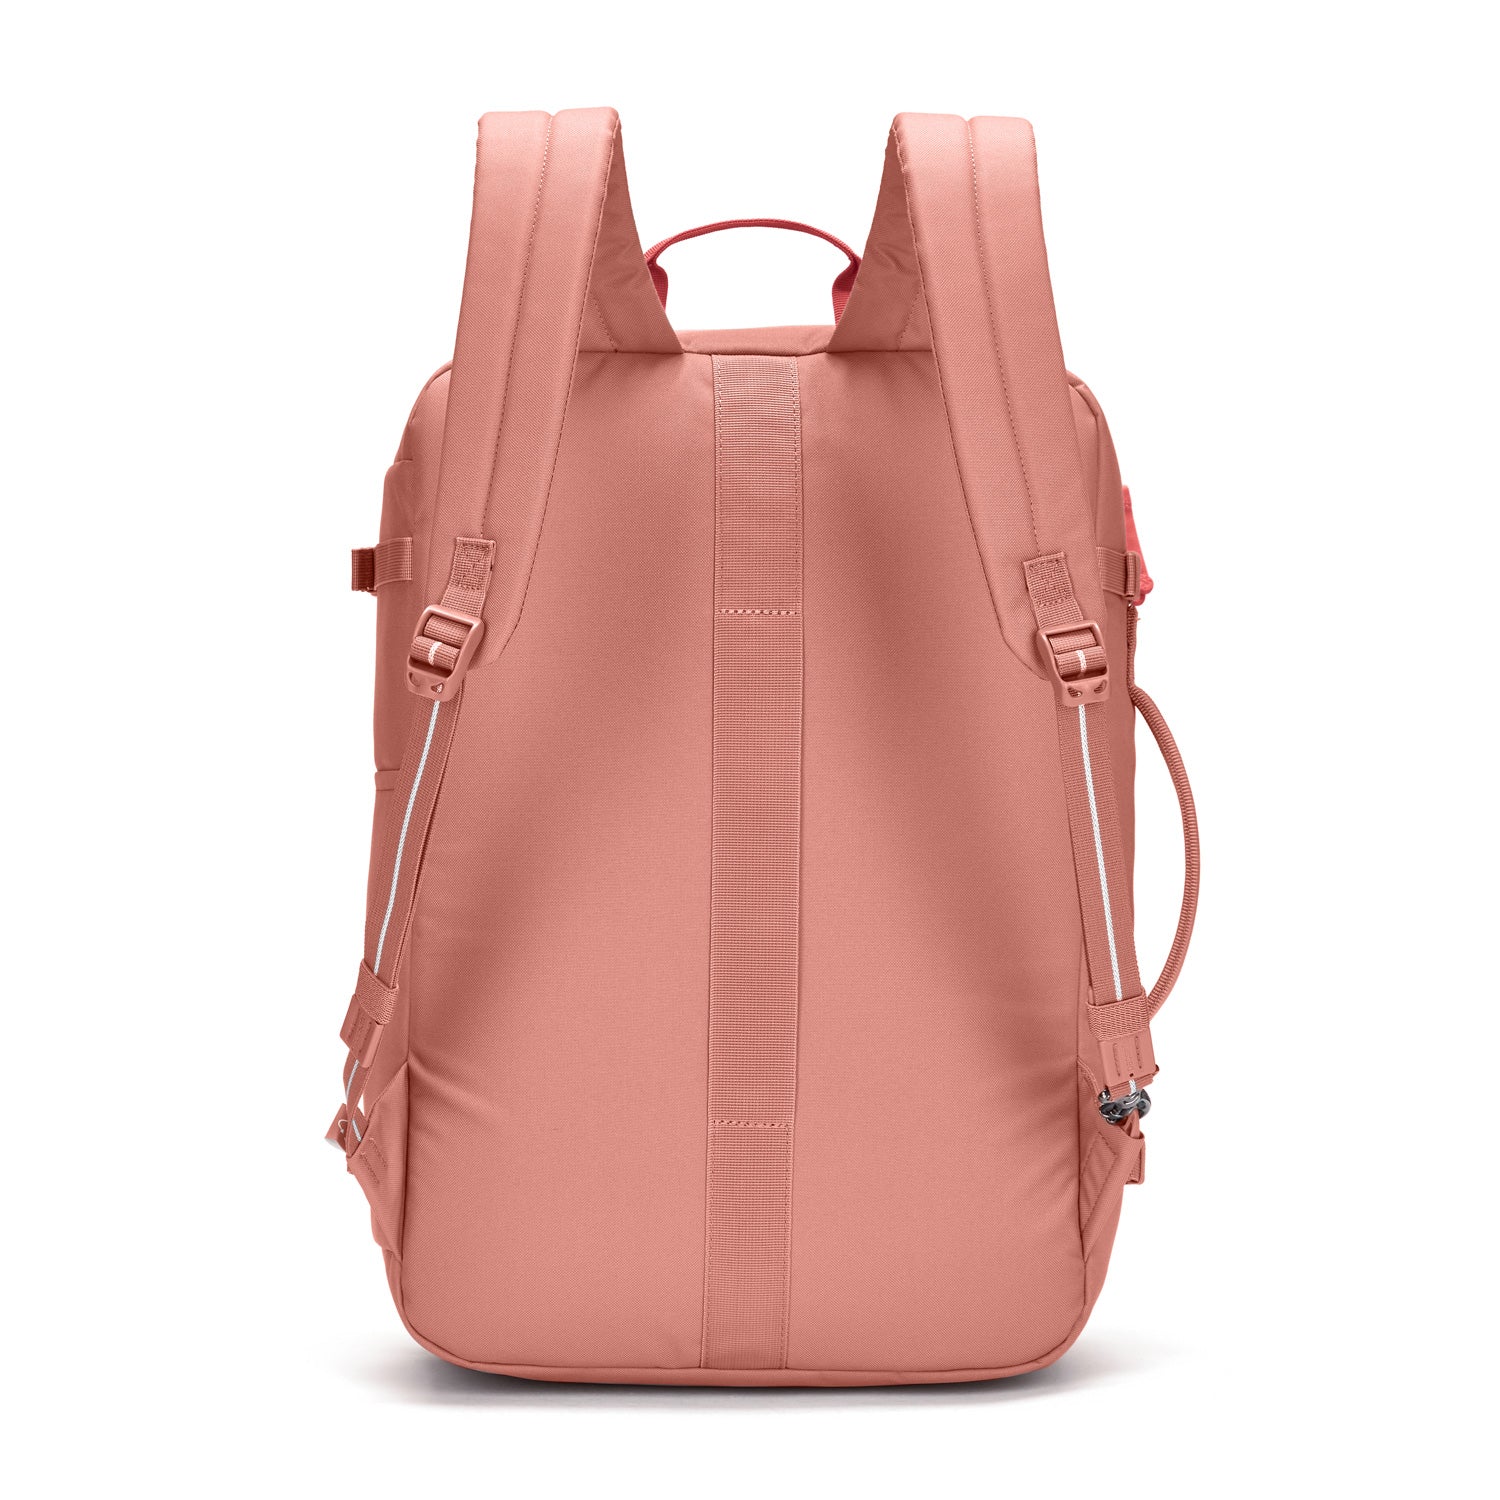 Pacsafe - Pacsafe GO Carry-on Backpack 34L - Rose-2